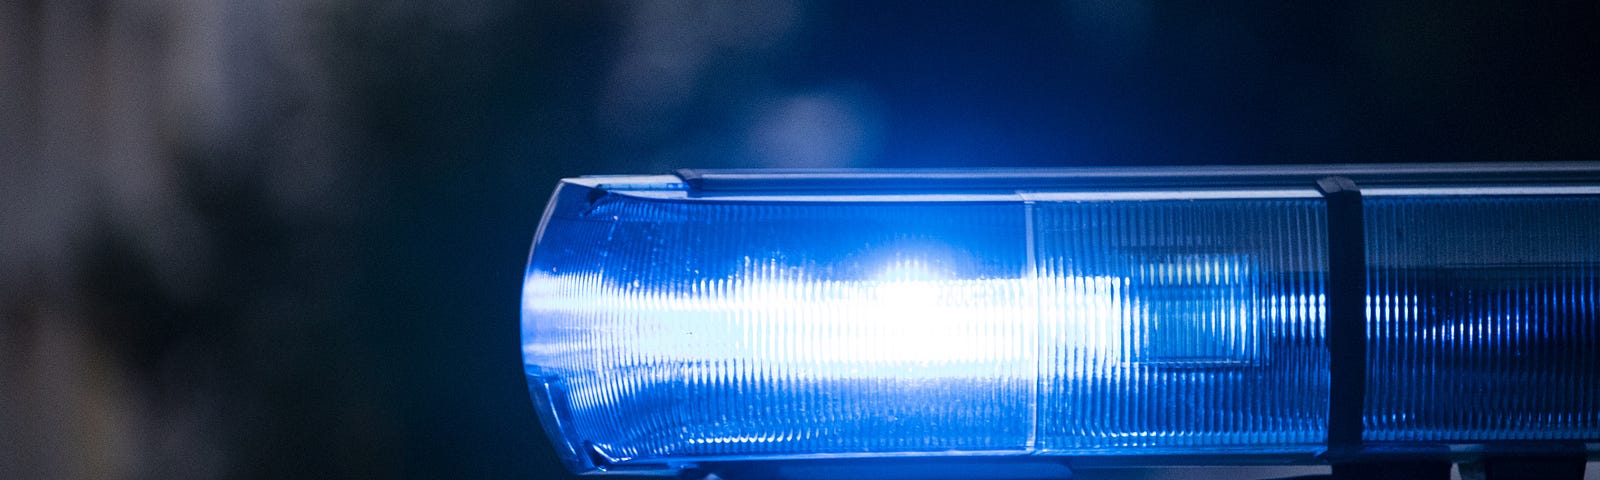 Blue light on a police car shining into the darkness.